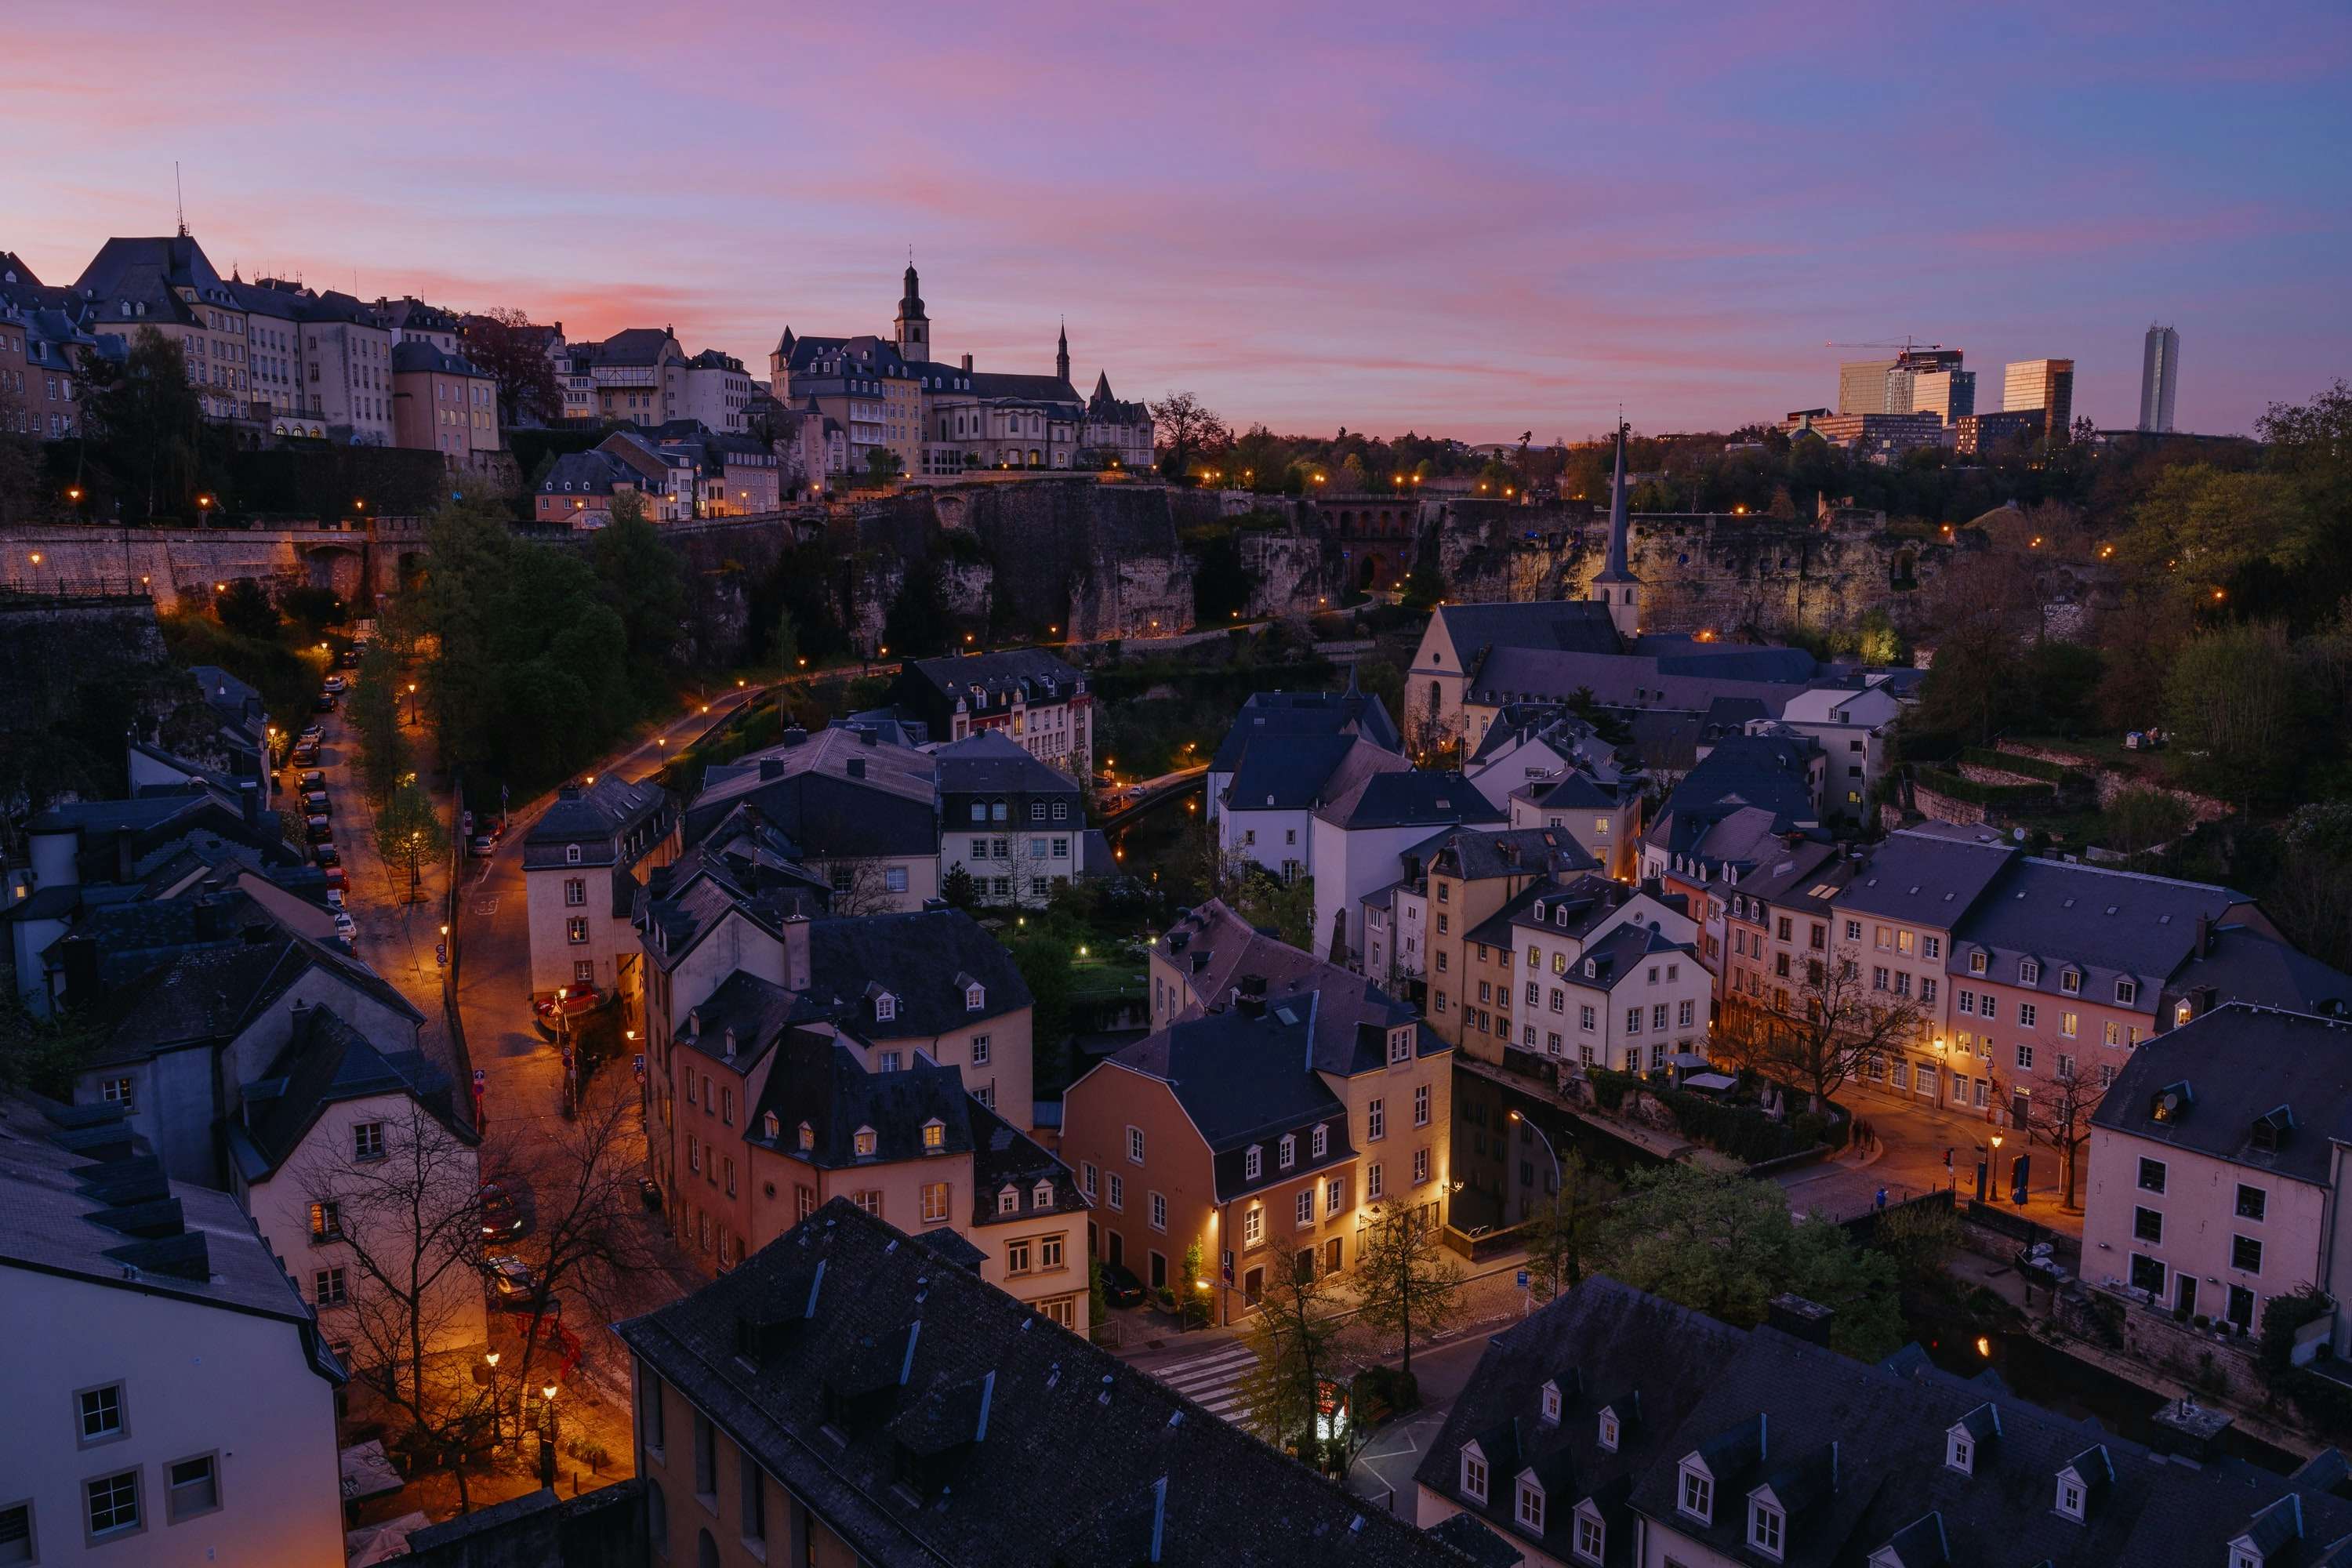 MFEX gains new trading license in Luxembourg (CSSF) and promotes global business development